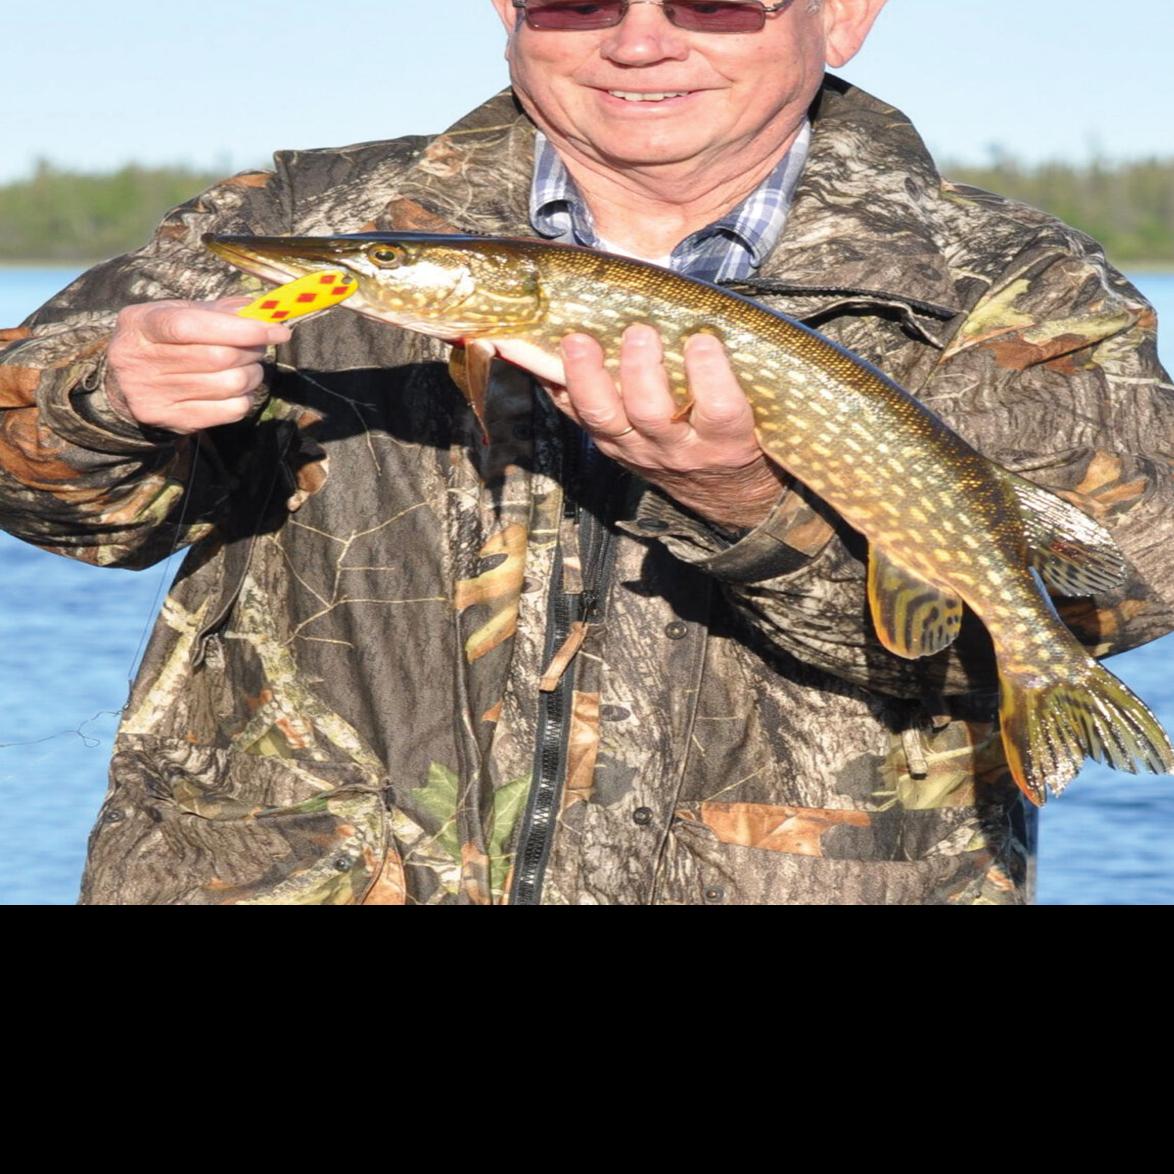 Northern Pike Caught On My Fly Rod, Ray F.